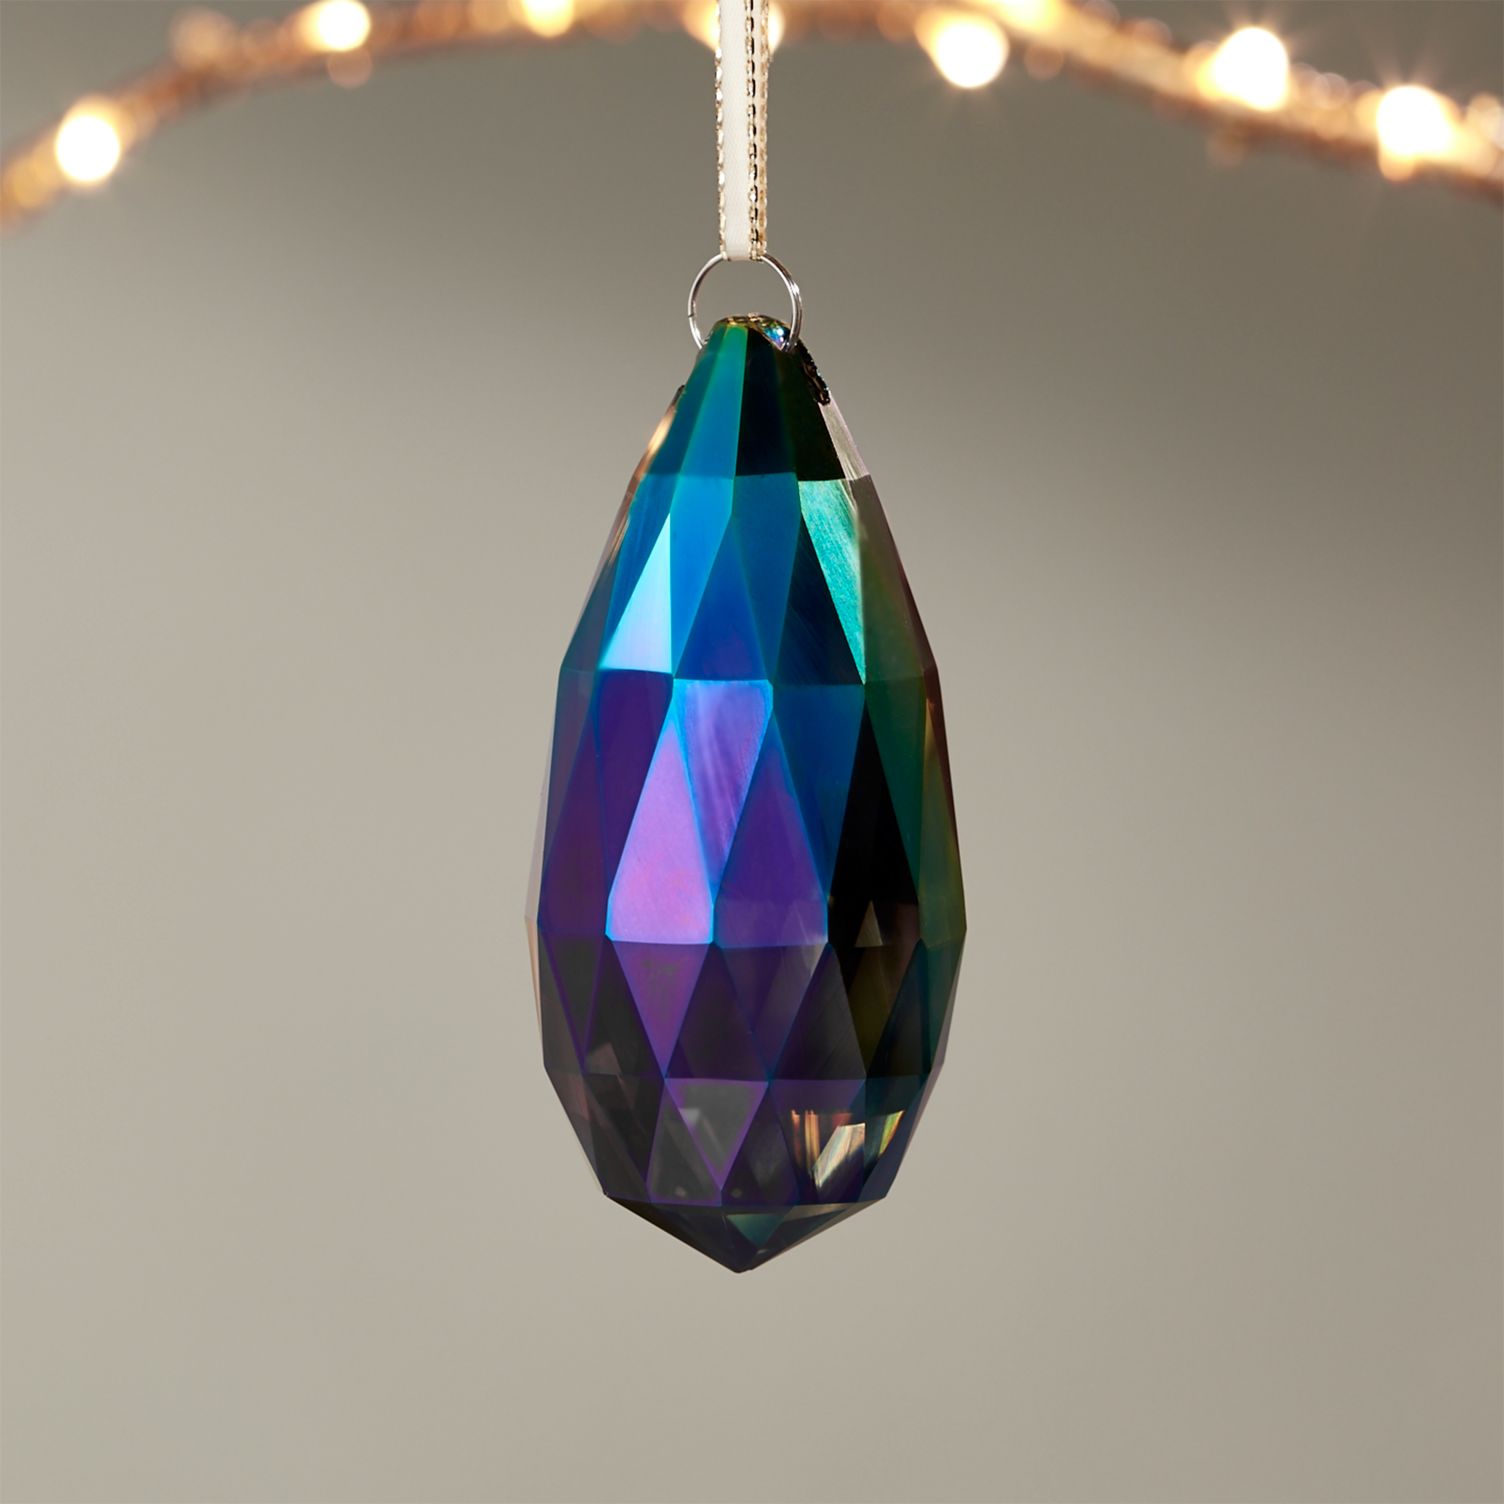 Teal-jewel-ornament-from-CB2